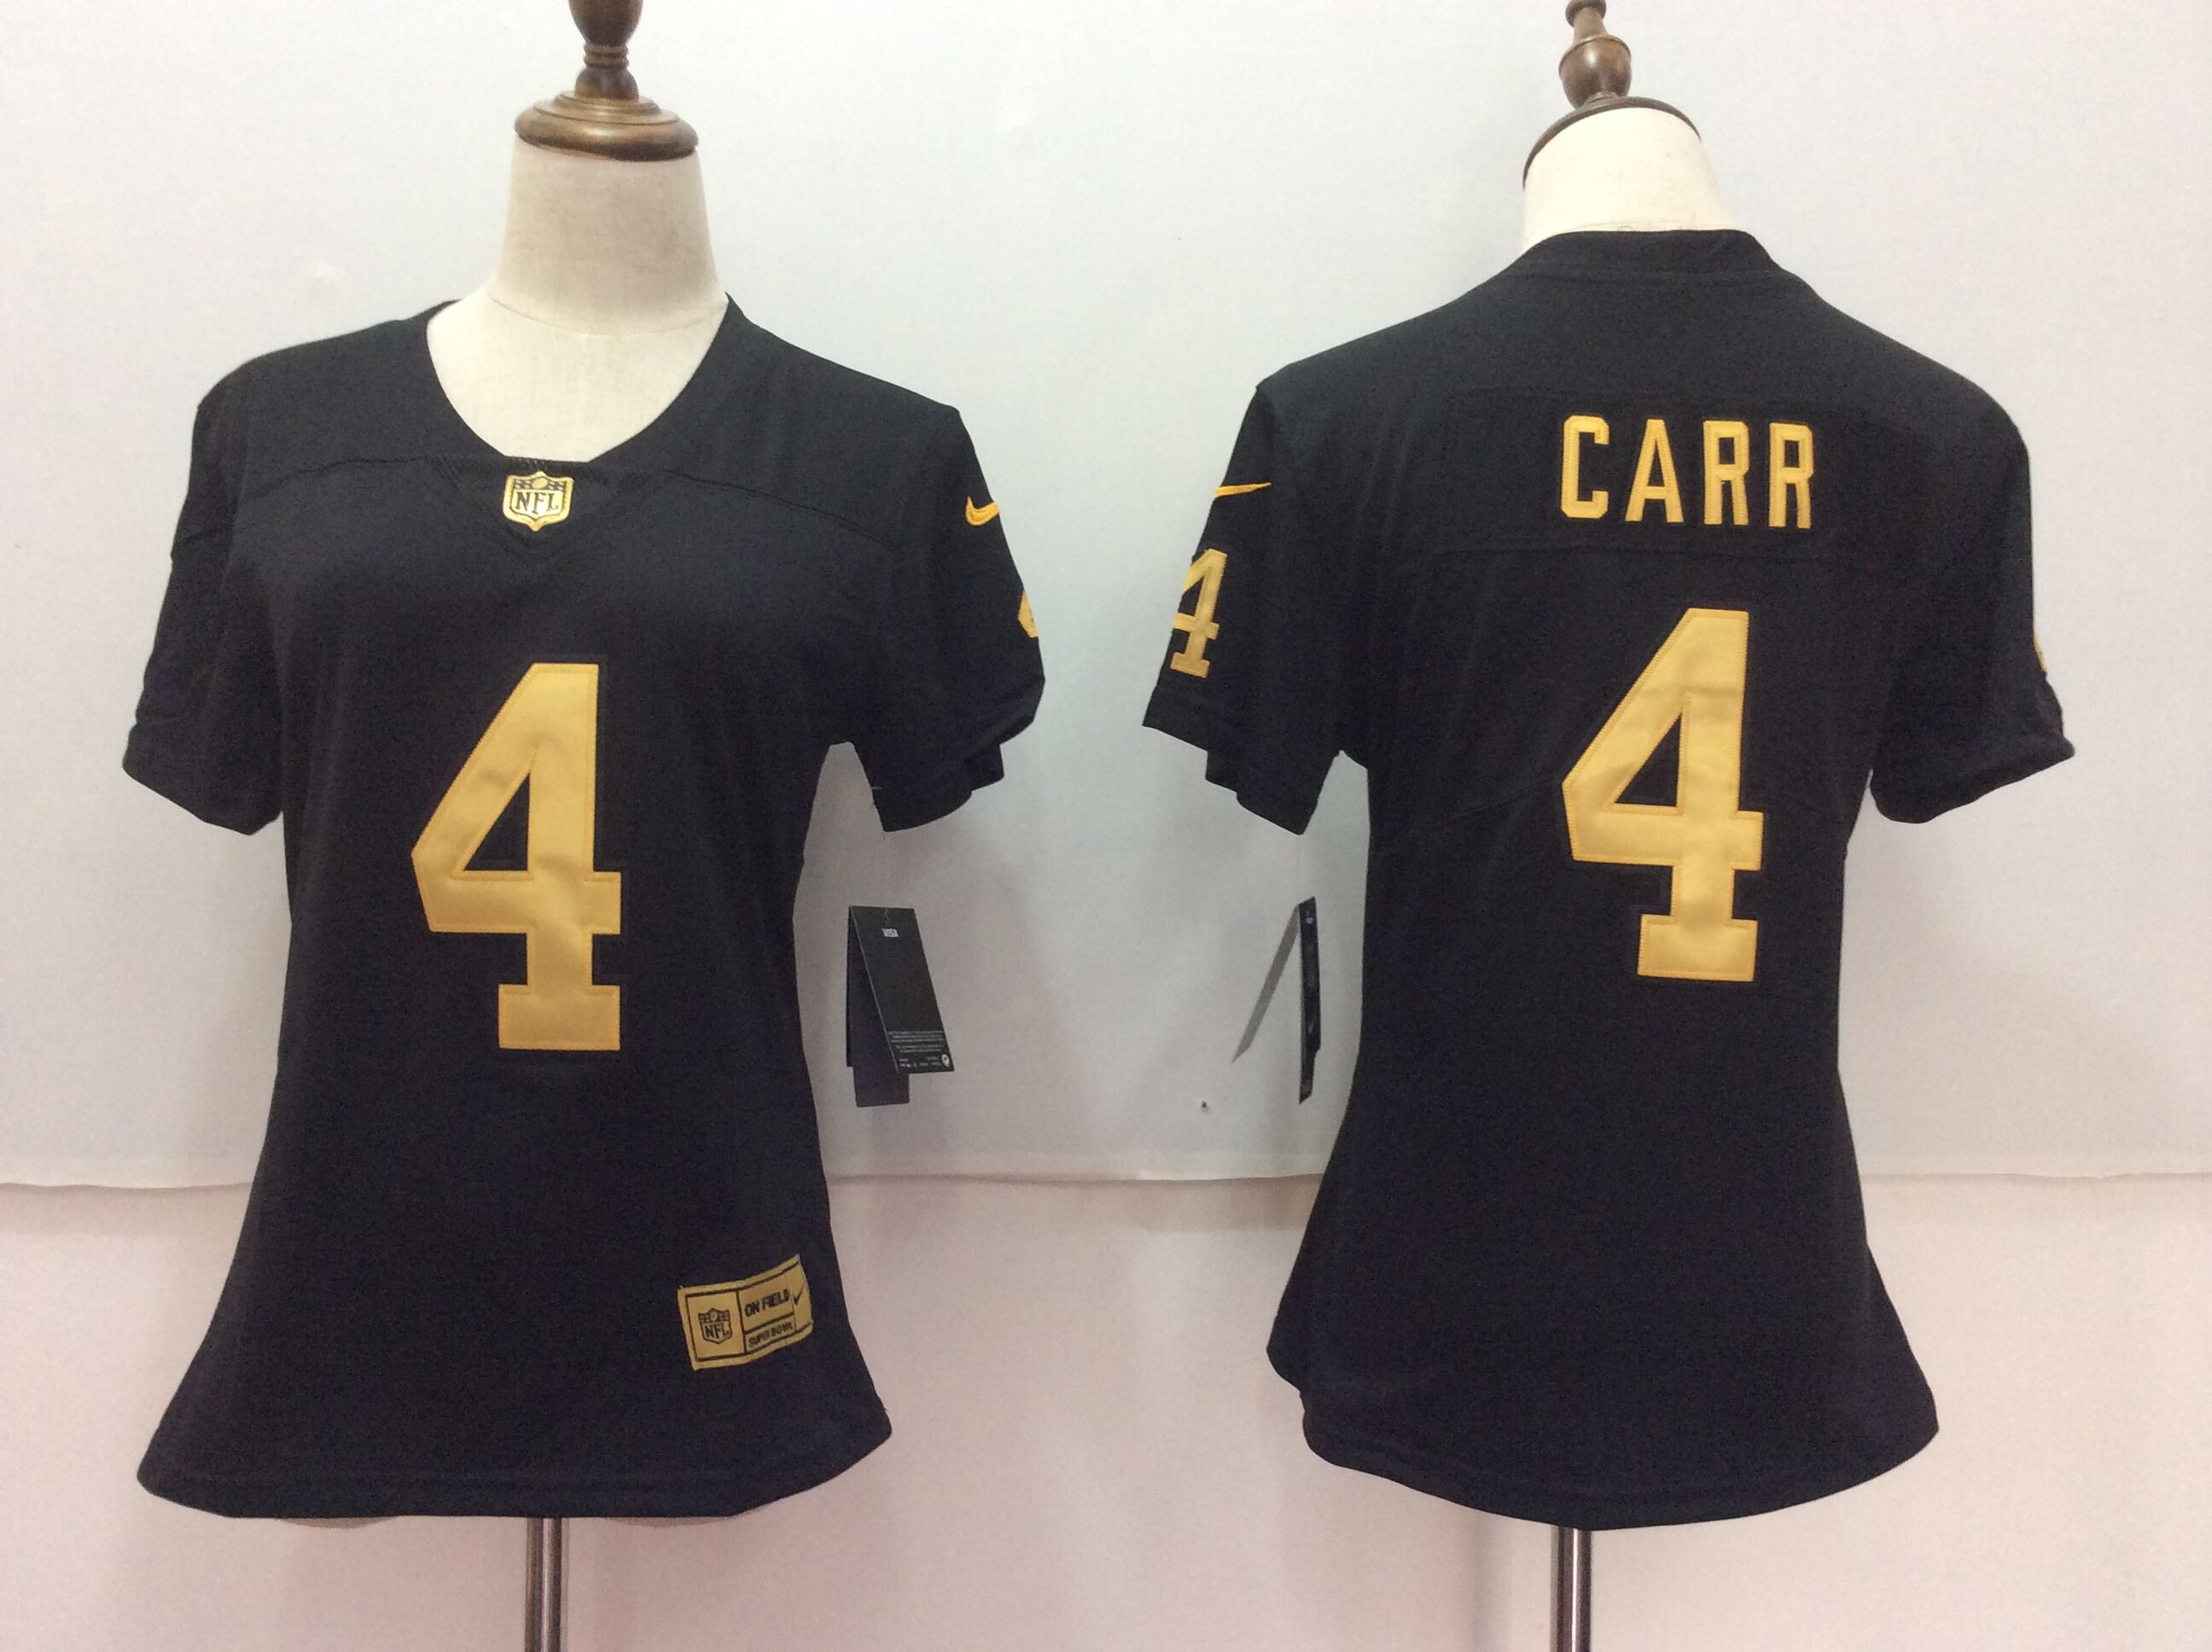 Womens NFL Oakland Raiders #4 Carr Black Gold Number Jersey